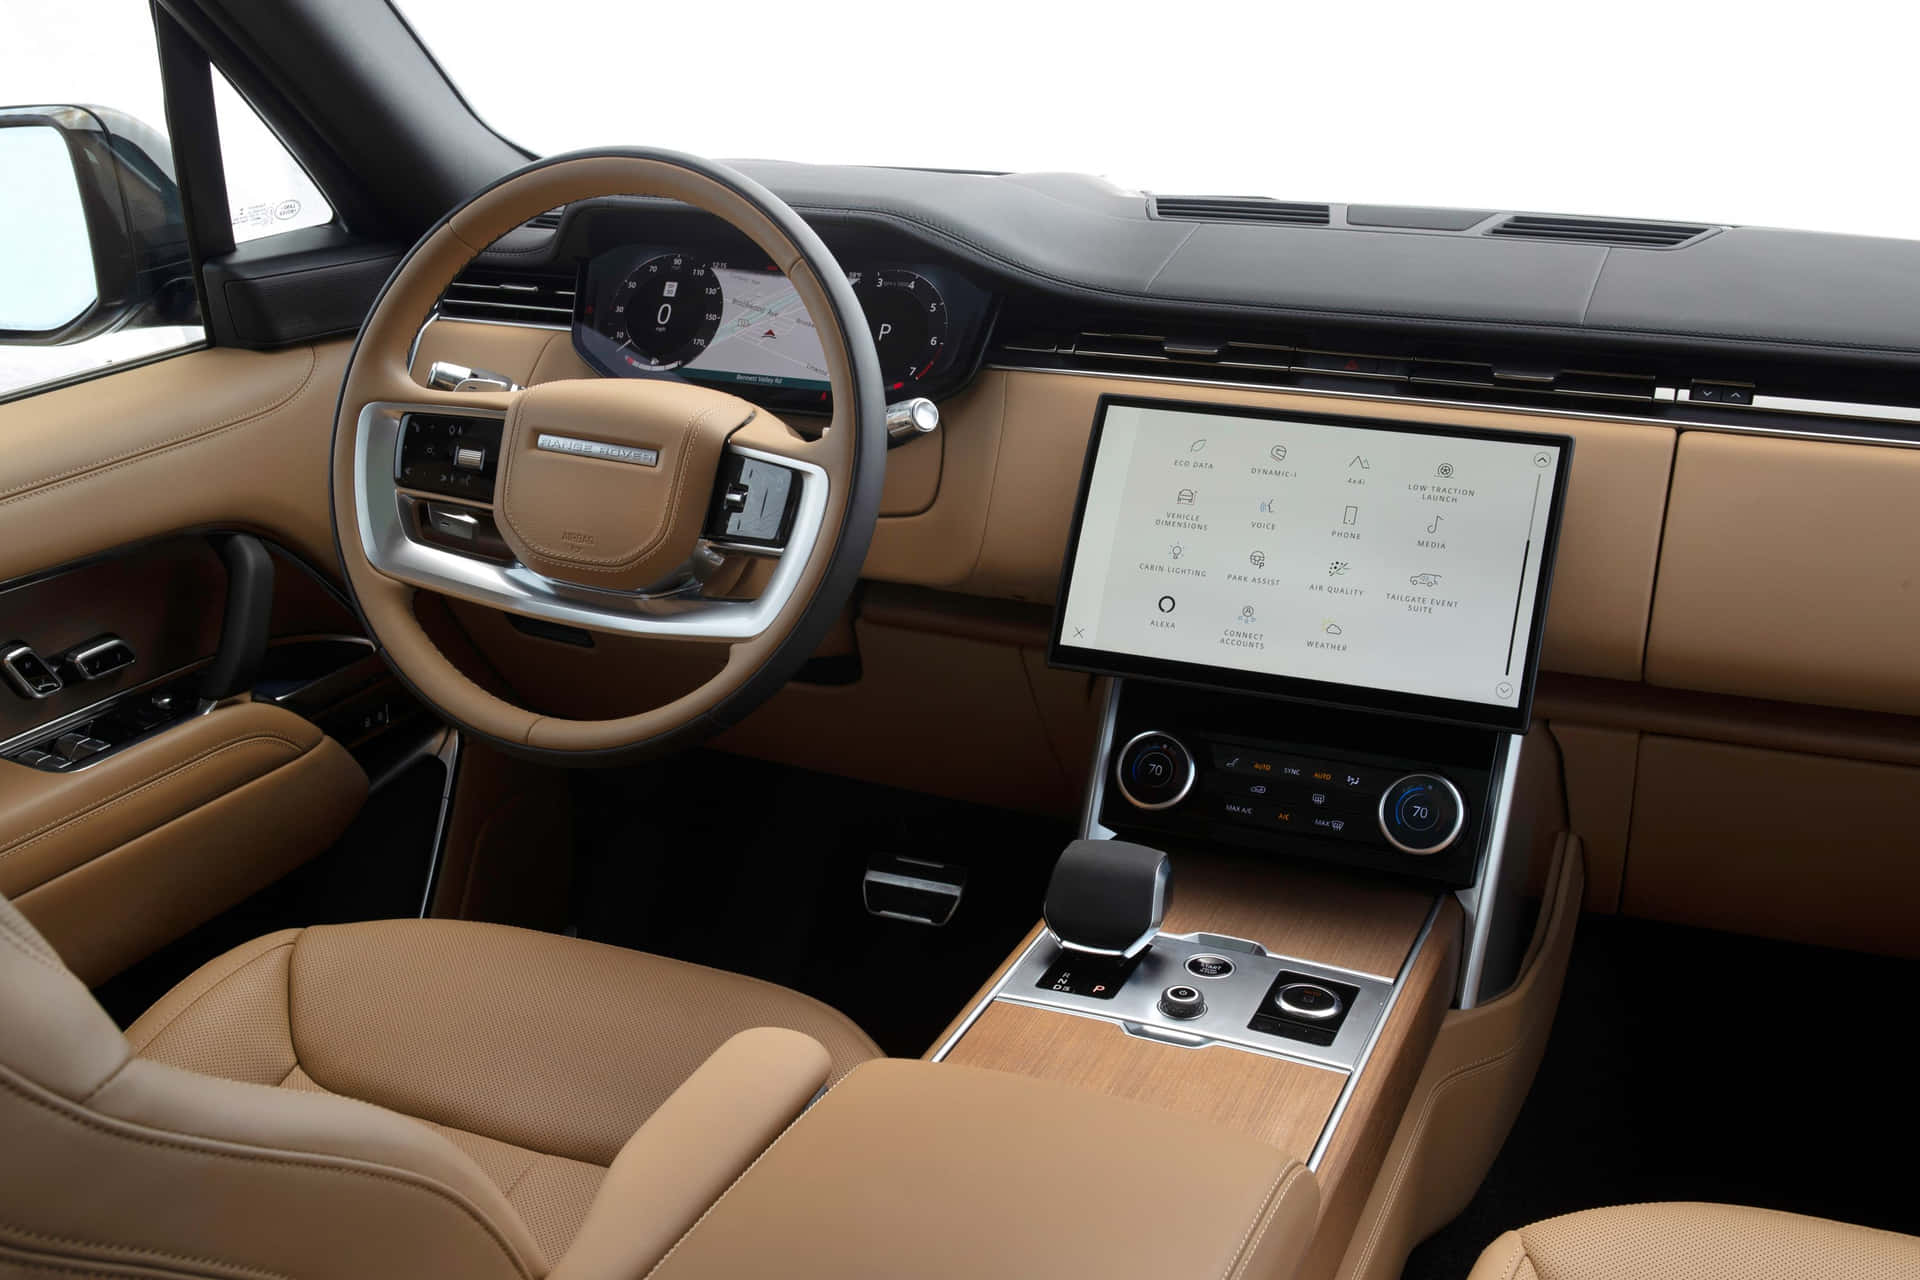 Experience true luxury with the Rover Range Rover